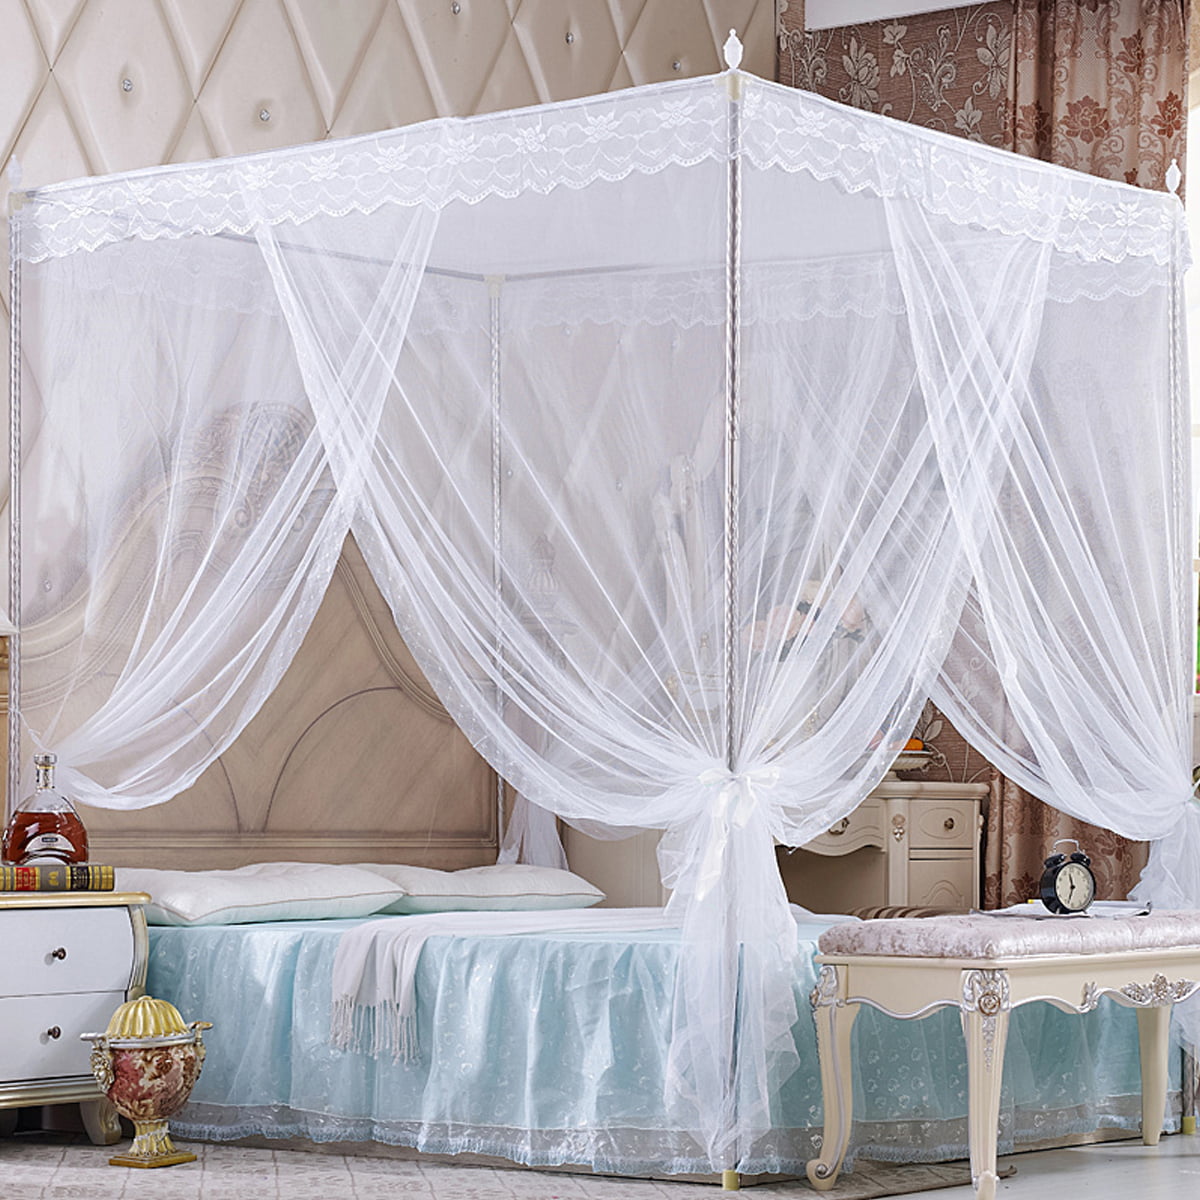 Details about   Queen Metal Canopy Bed with X Frame Corner Post For Anti-Mosquito Netting Tent 